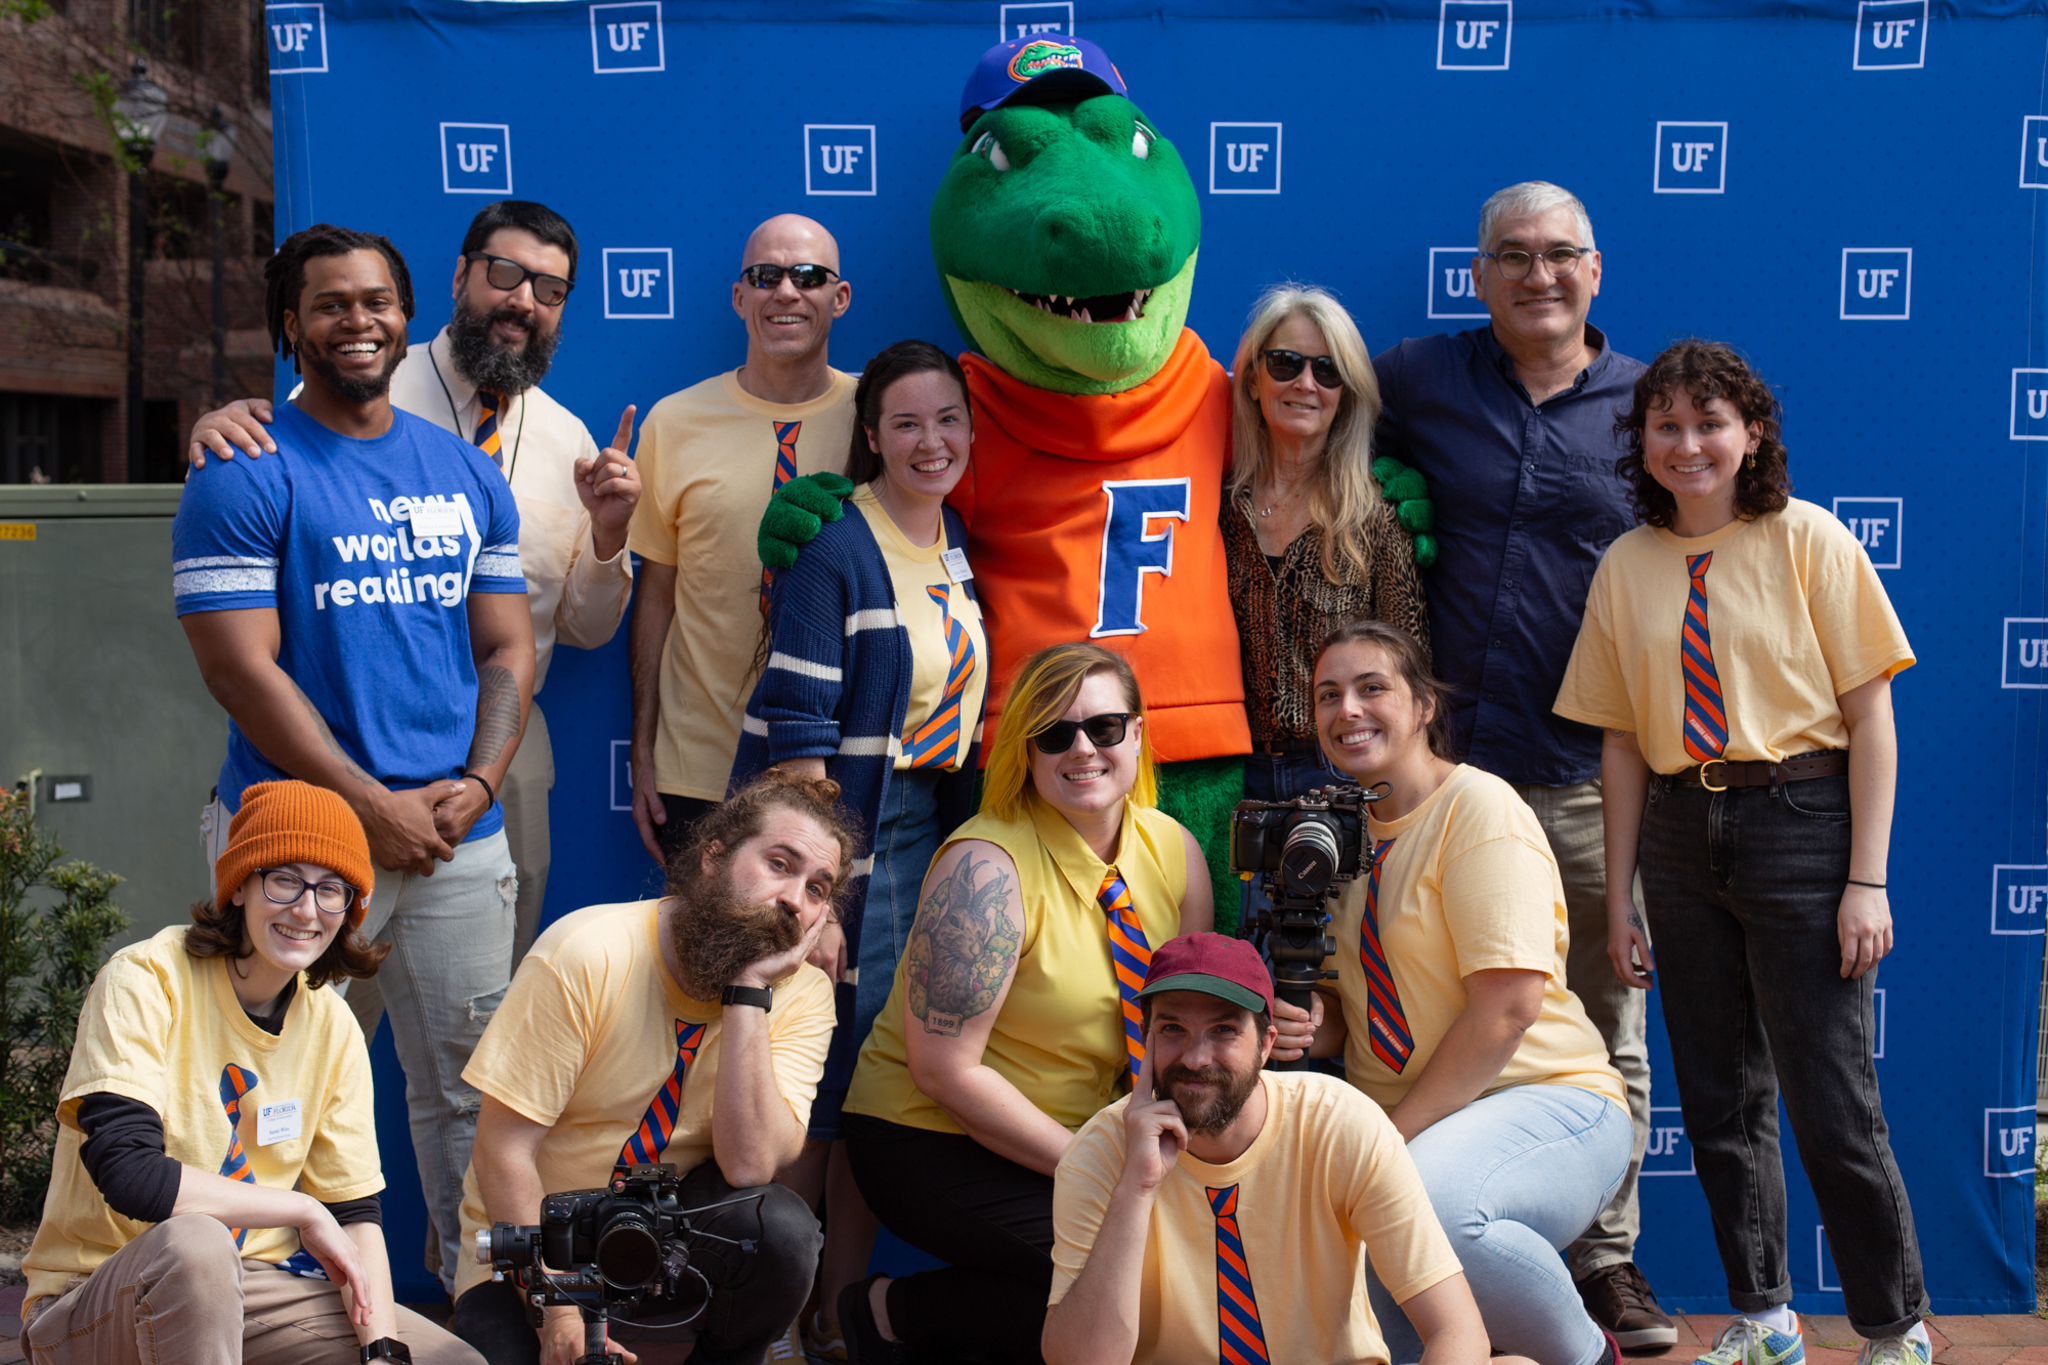 A group of people standing in front of a blue step and repeat banner and Albert, the University of Florida mascot.